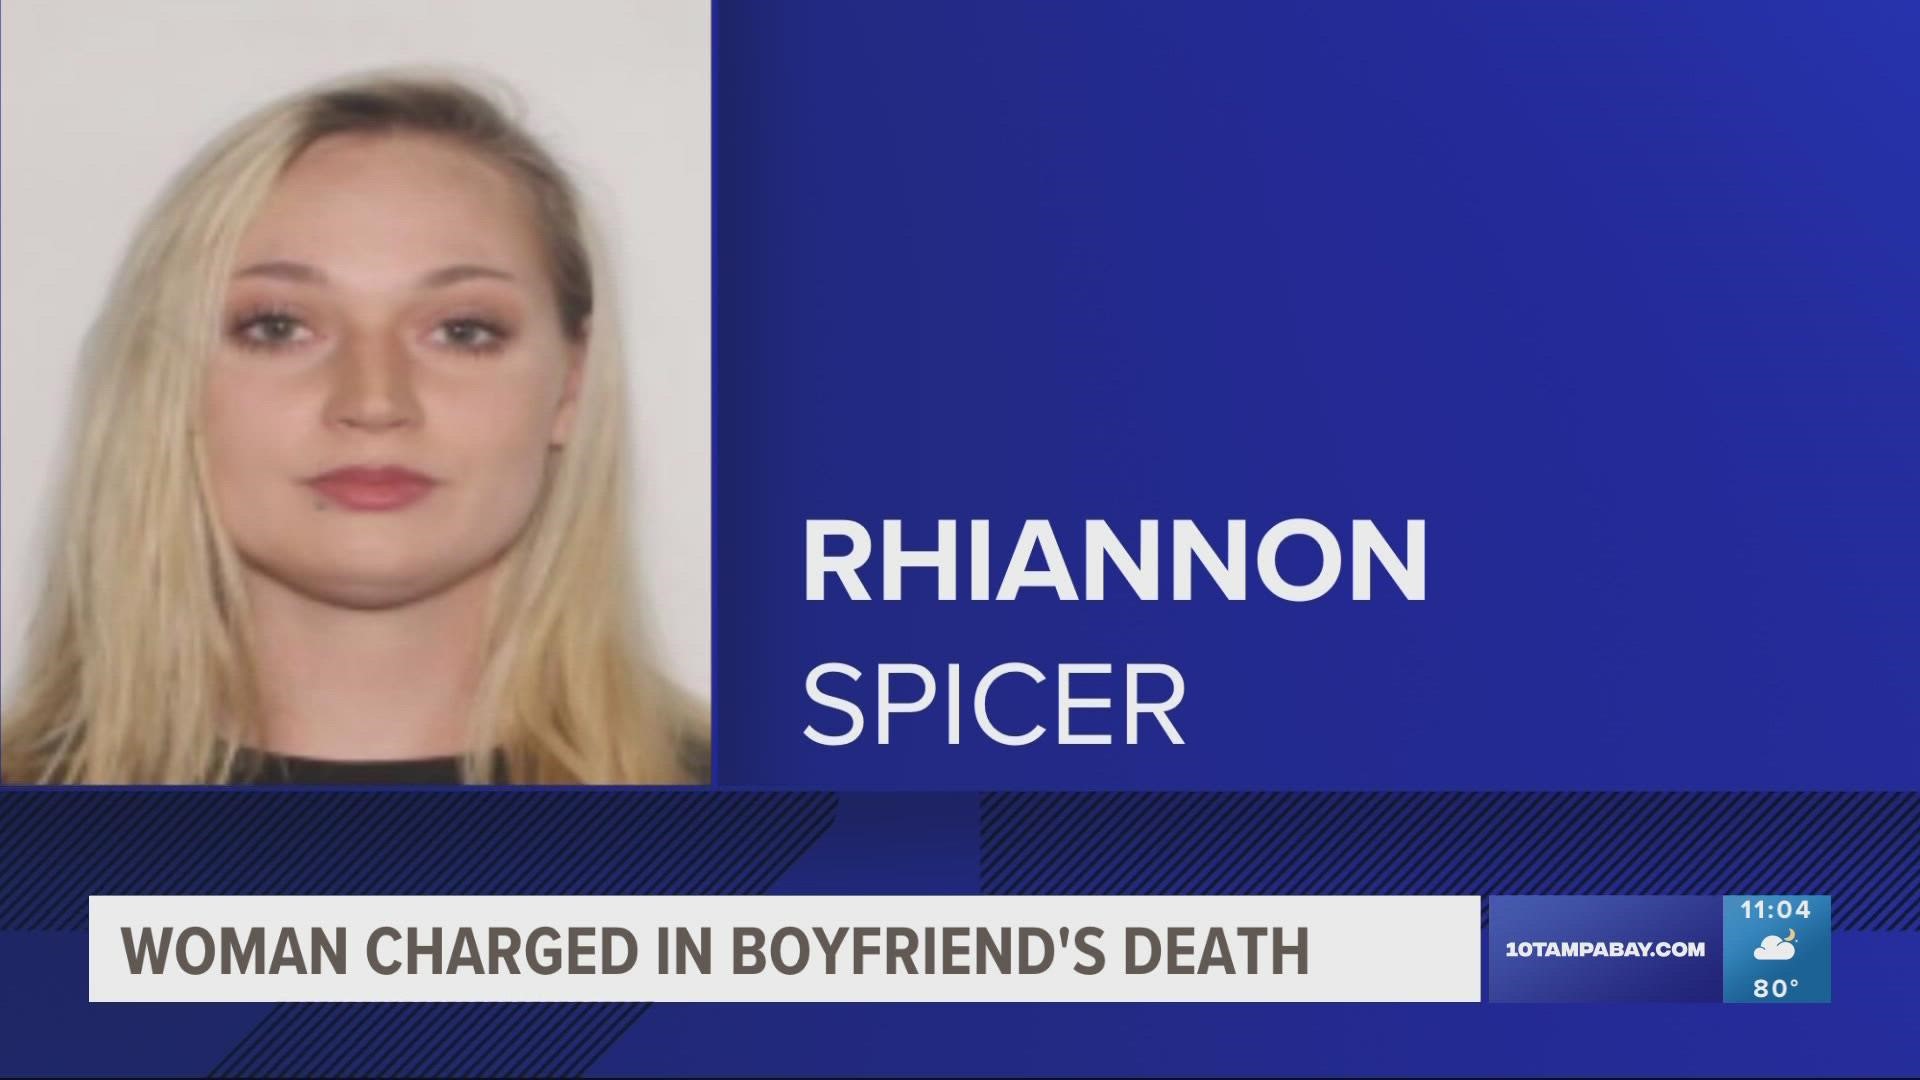 Rhiannon Spicer is reportedly being charged with 2nd degree murder.